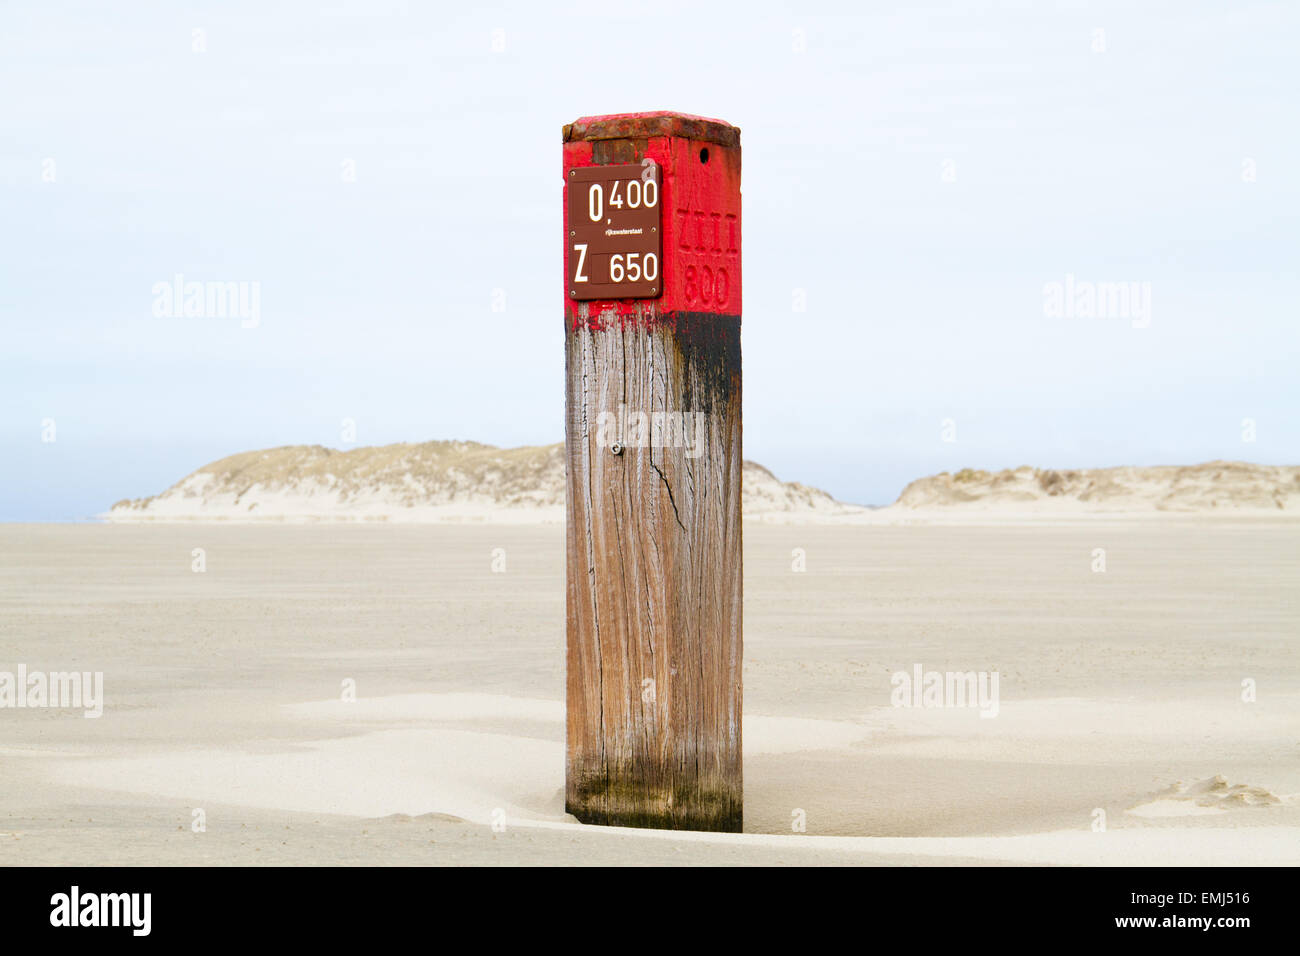 Red pole with distance marking on beach Stock Photo